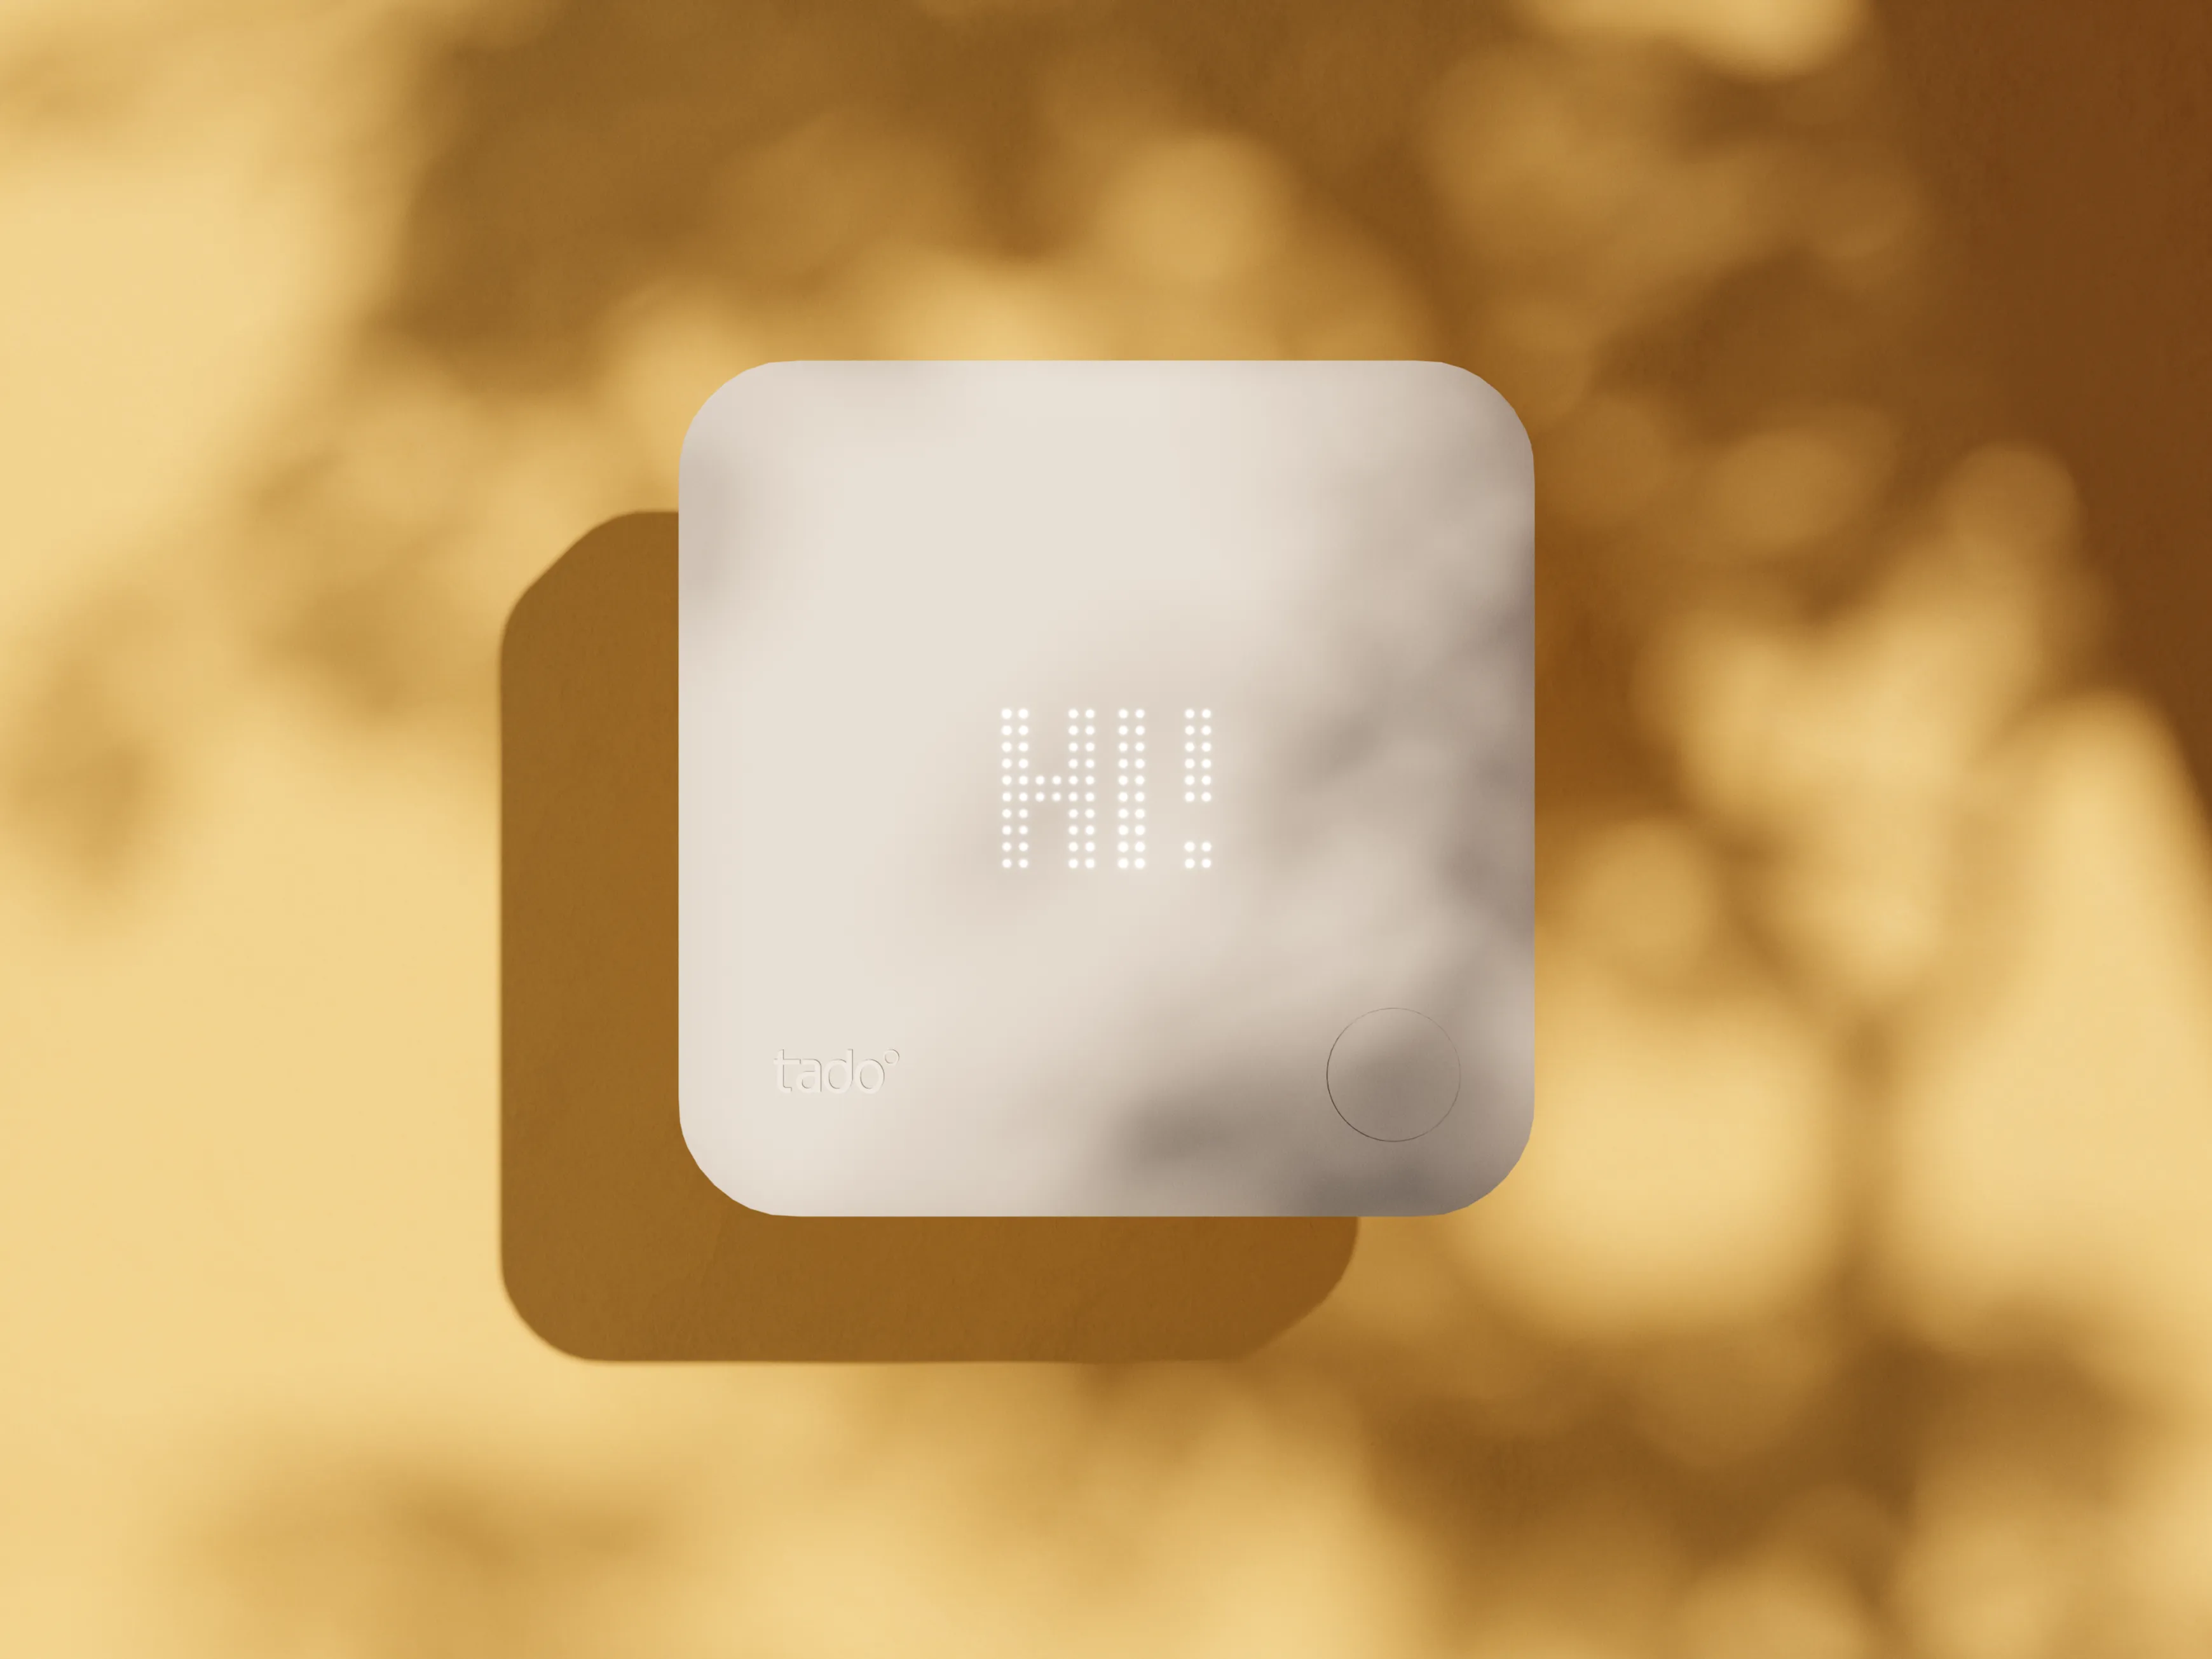 The tado smart thermostat floating in front of a yellow wall